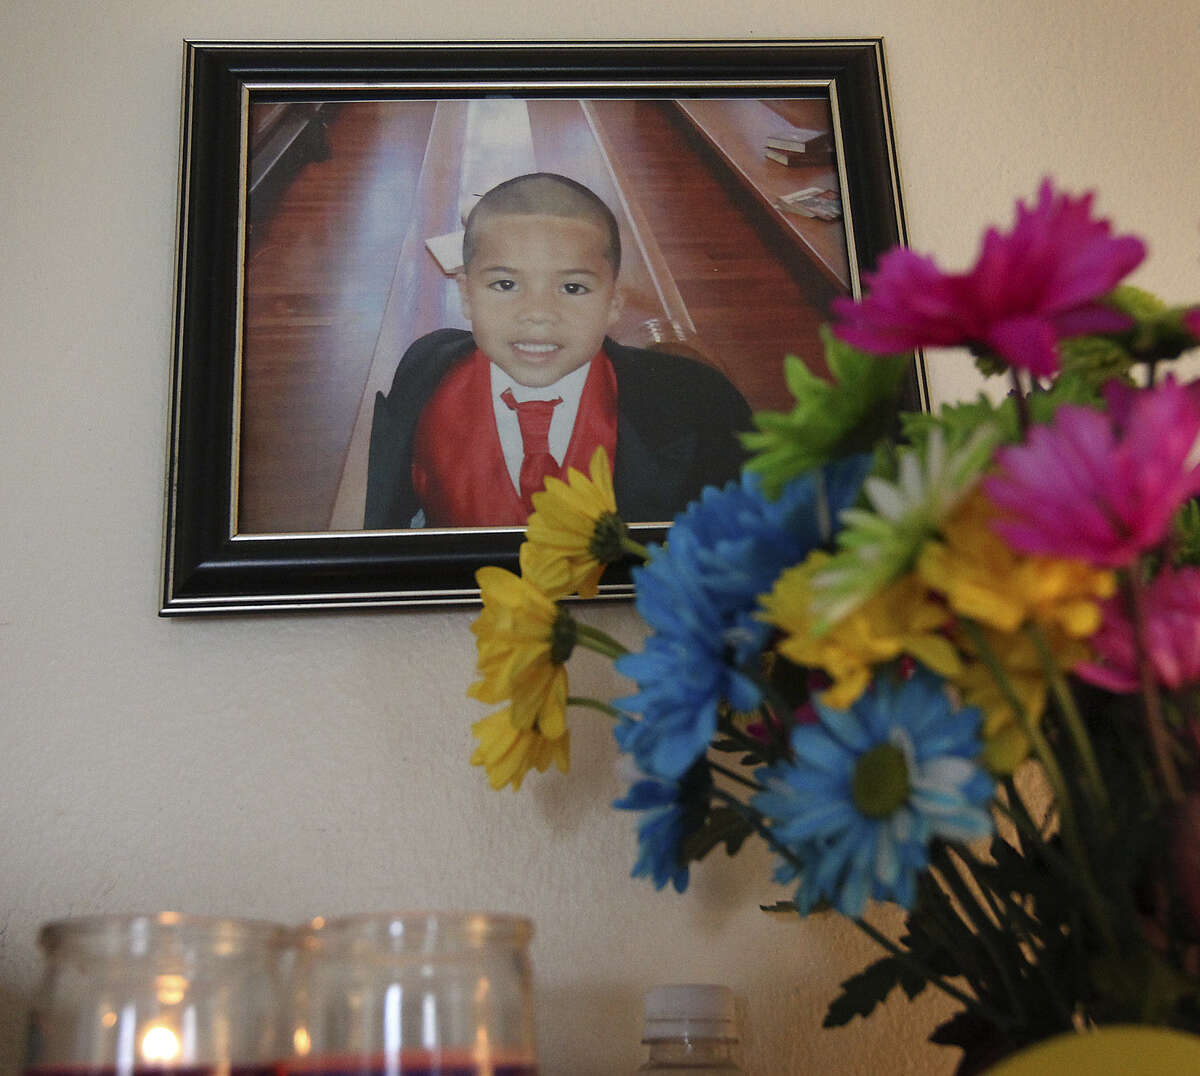 Josiah Williams, 5, was one of 10 children in Bexar County who died of abuse in the past fiscal year, which ended Aug. 31. In the previous year, 19 children died.